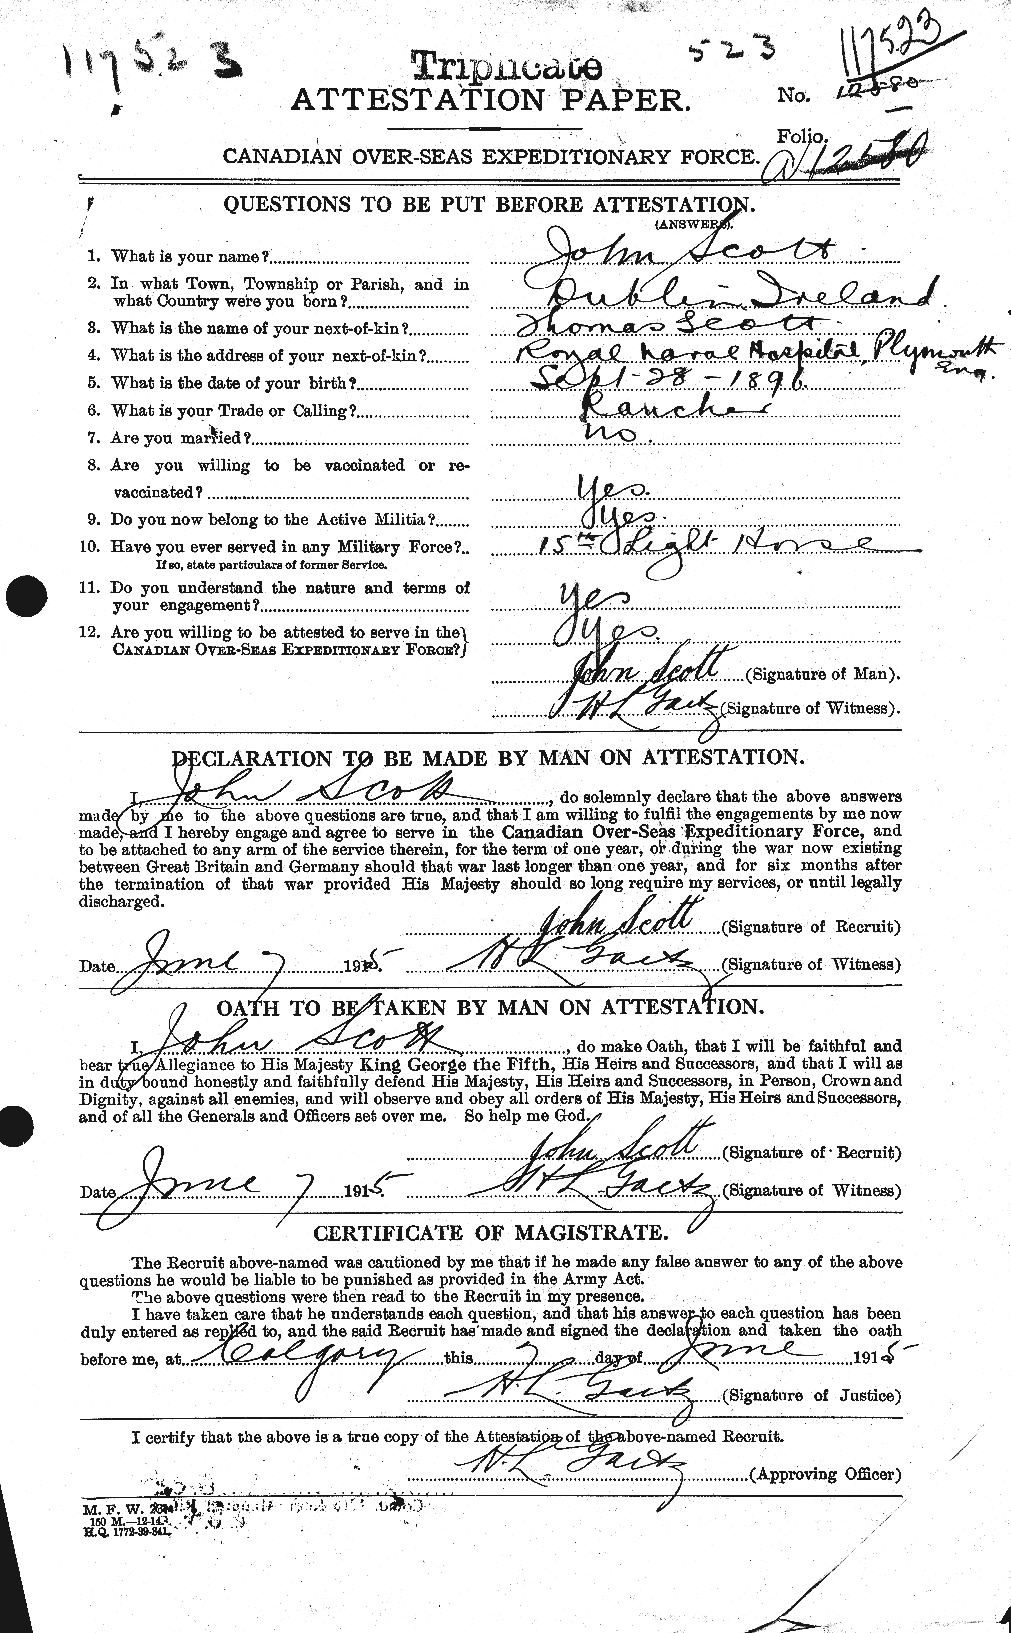 Personnel Records of the First World War - CEF 084906a